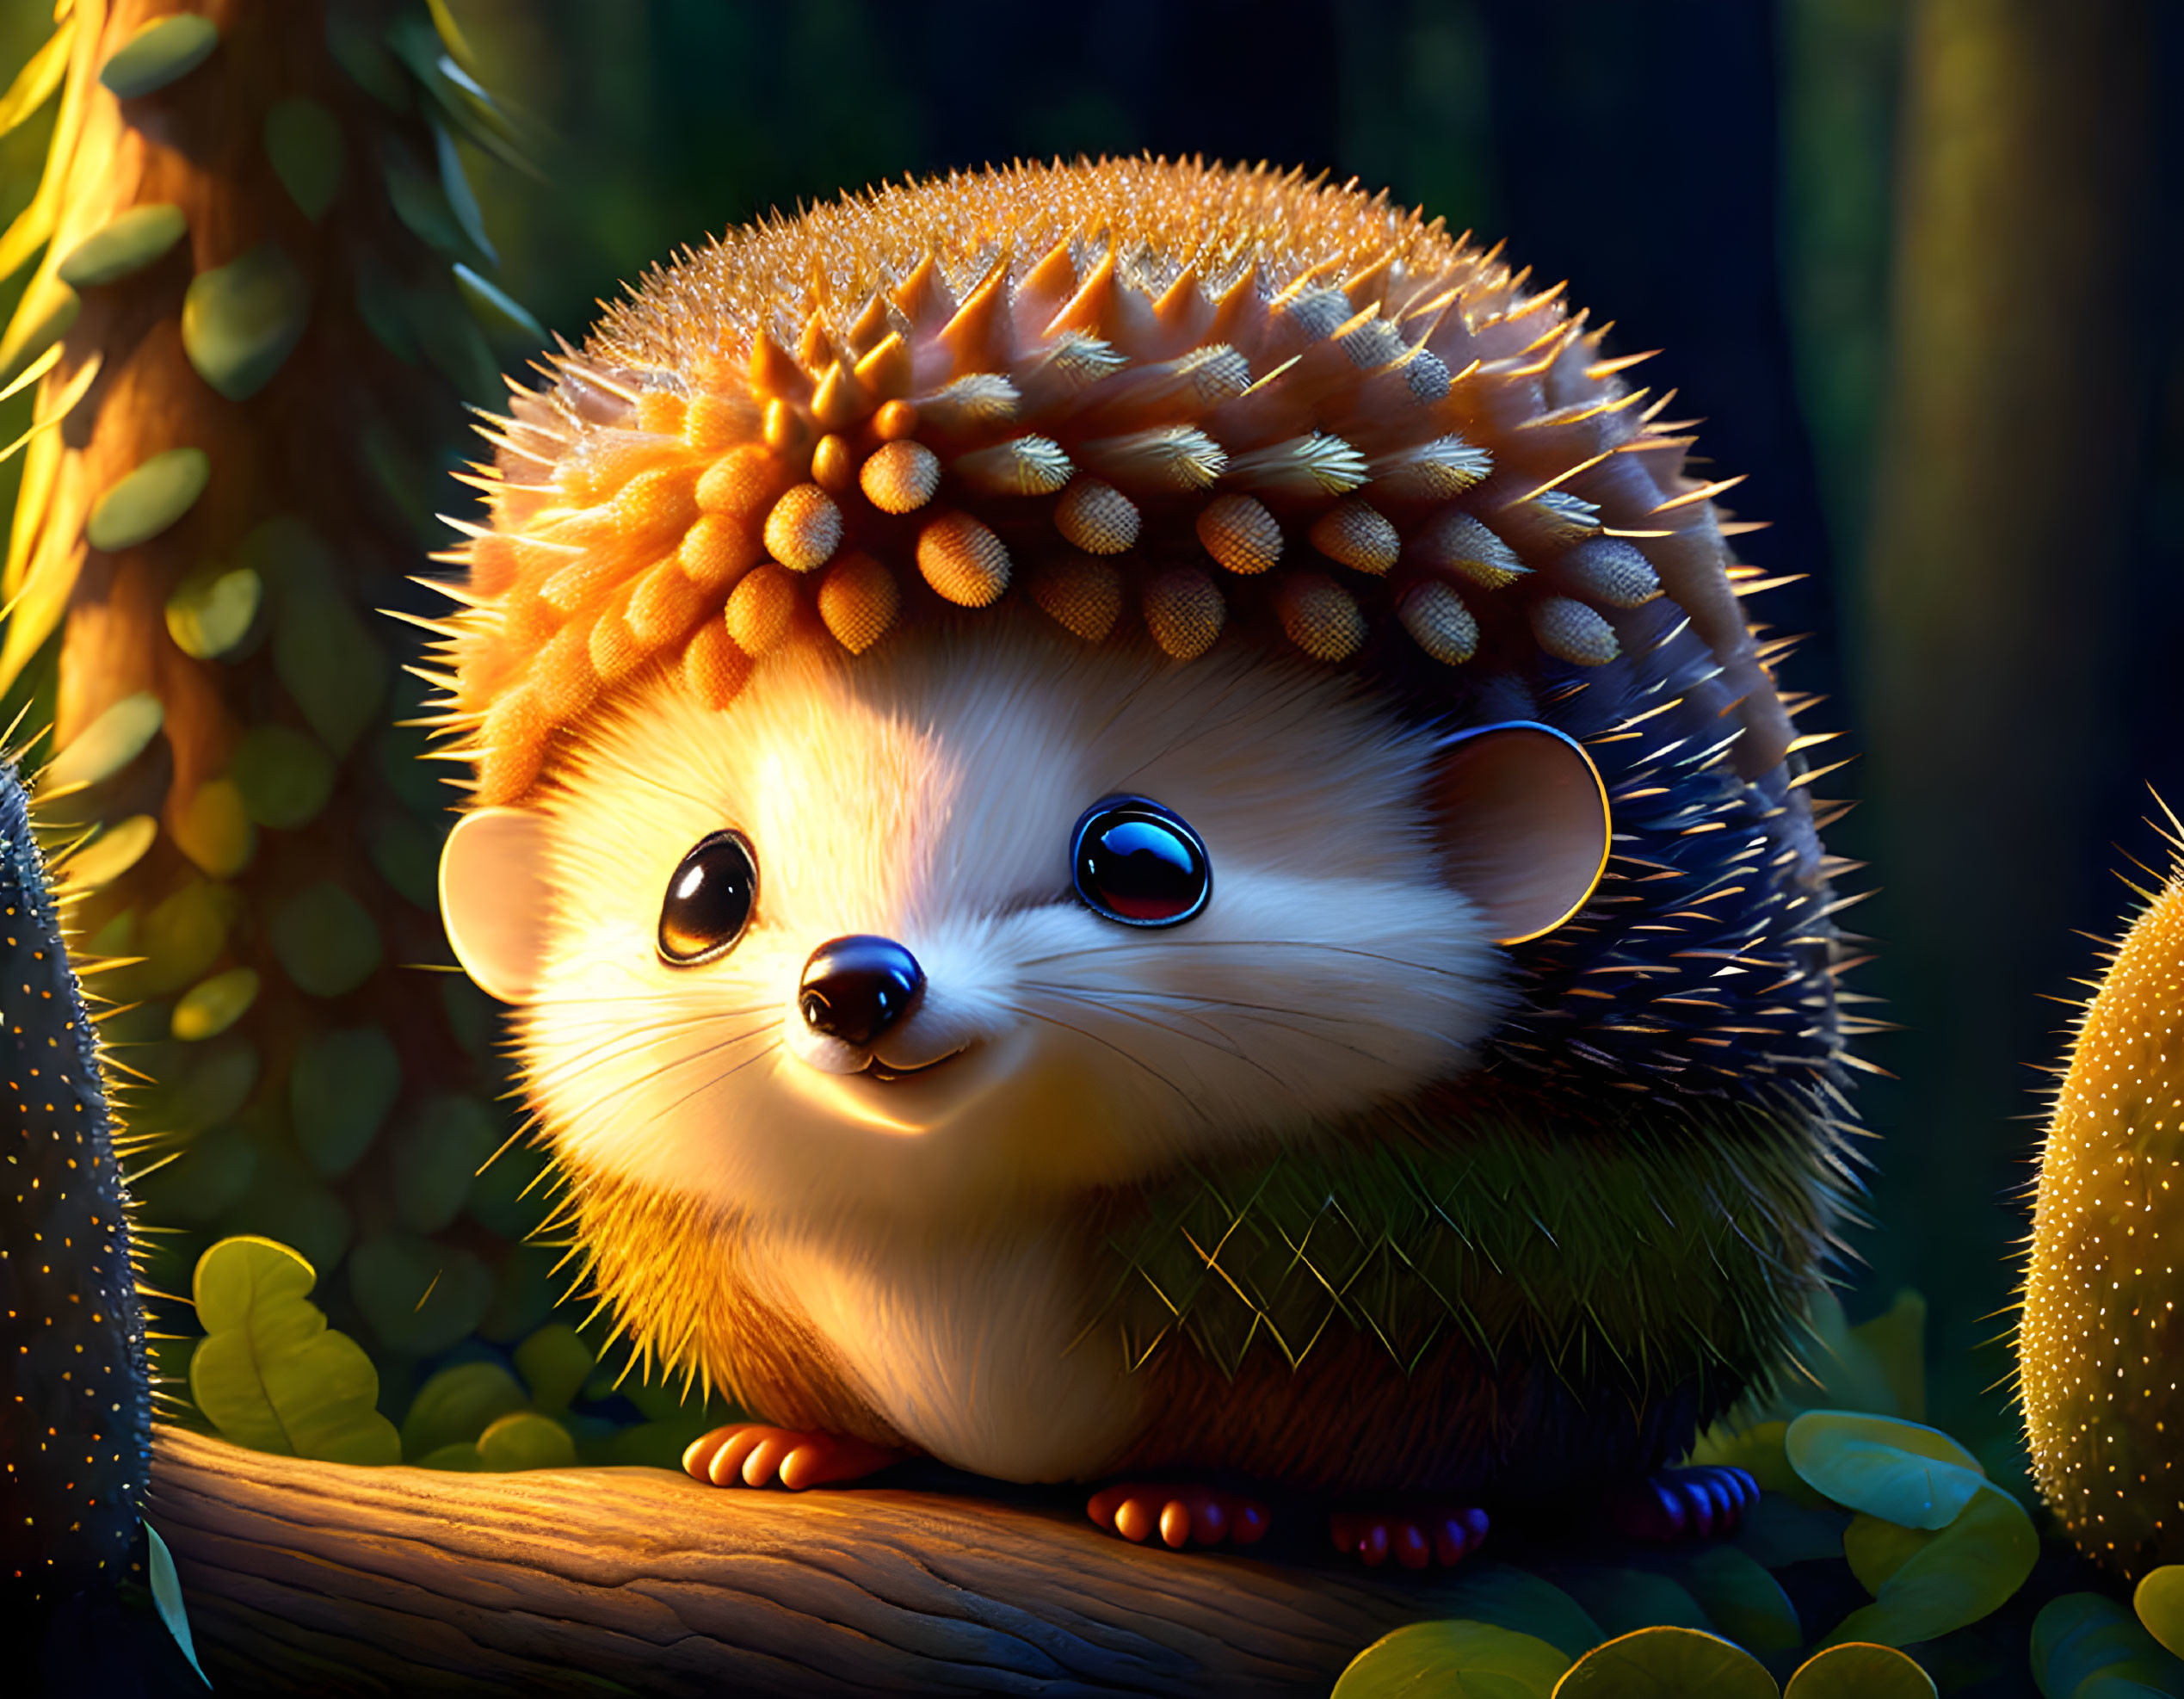 Animated hedgehog in nighttime forest with glossy eyes and warm glow